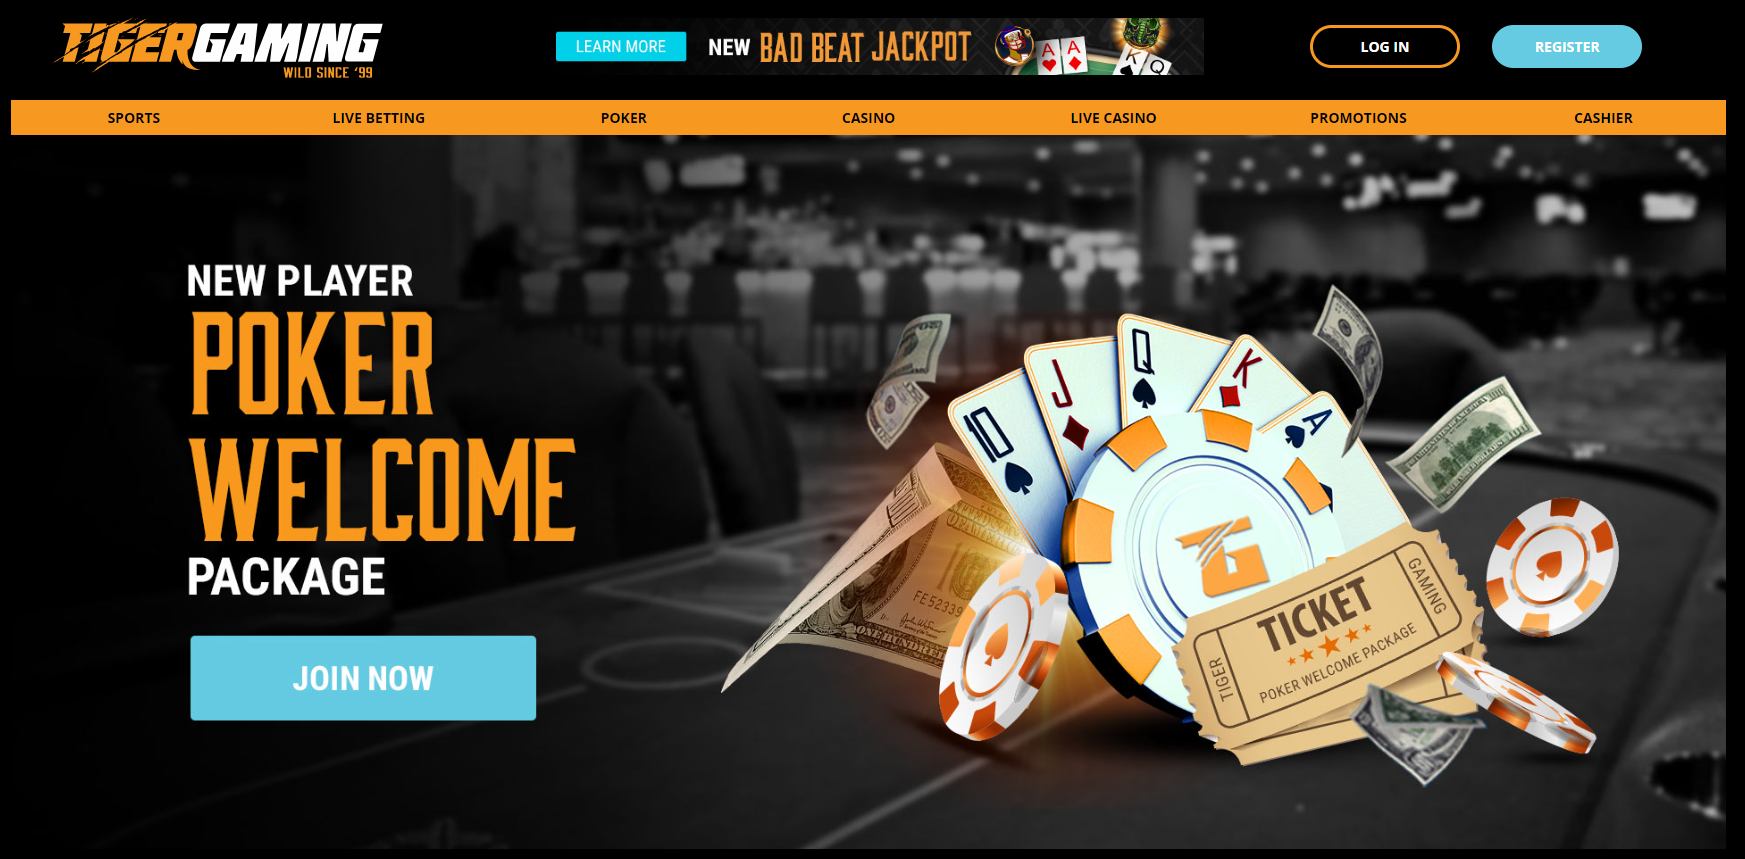 New Player Poker Welcome Package Tiger Gaming Casino